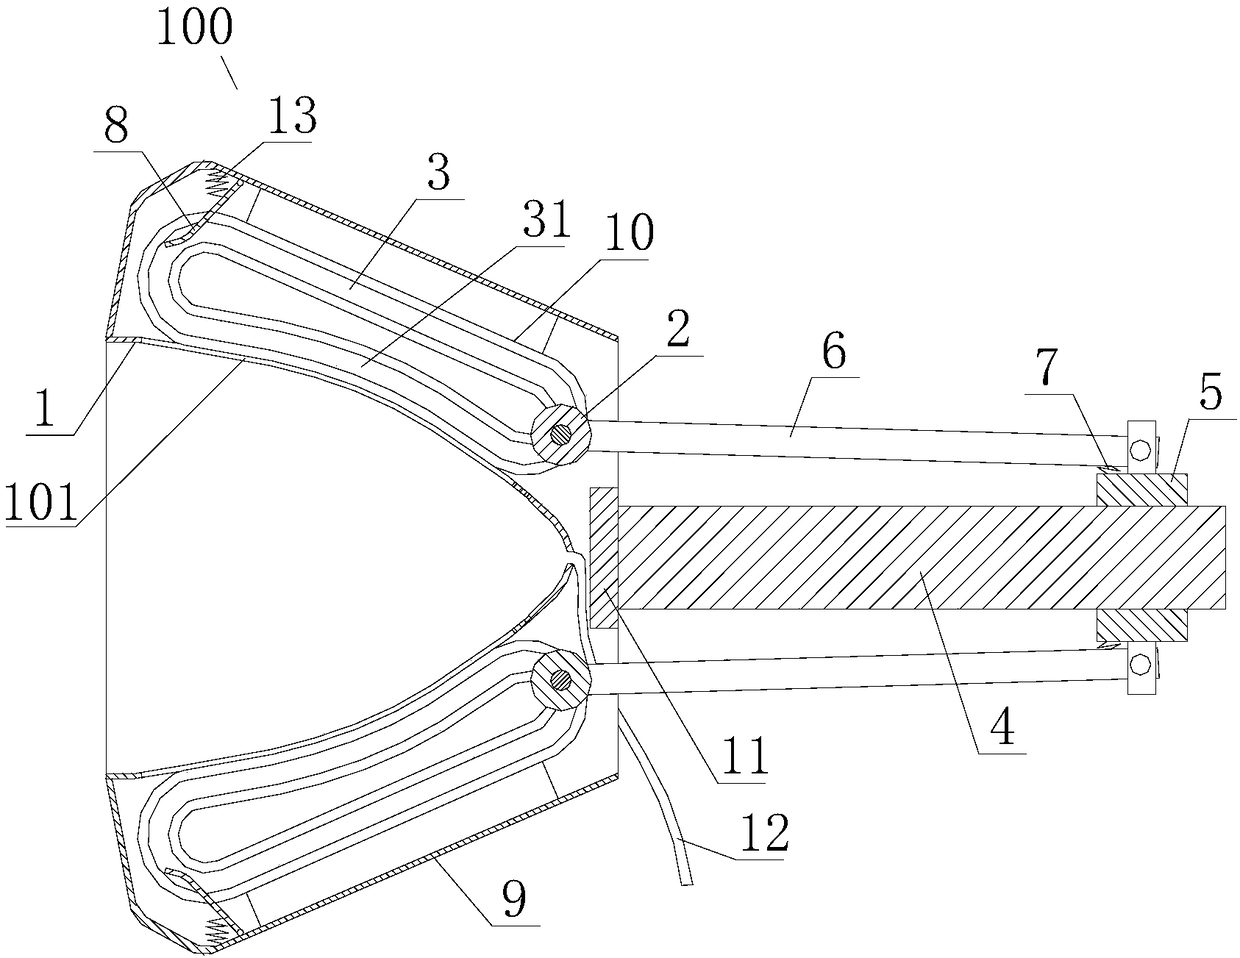 Lactiferous duct dredging and breast beautifying device